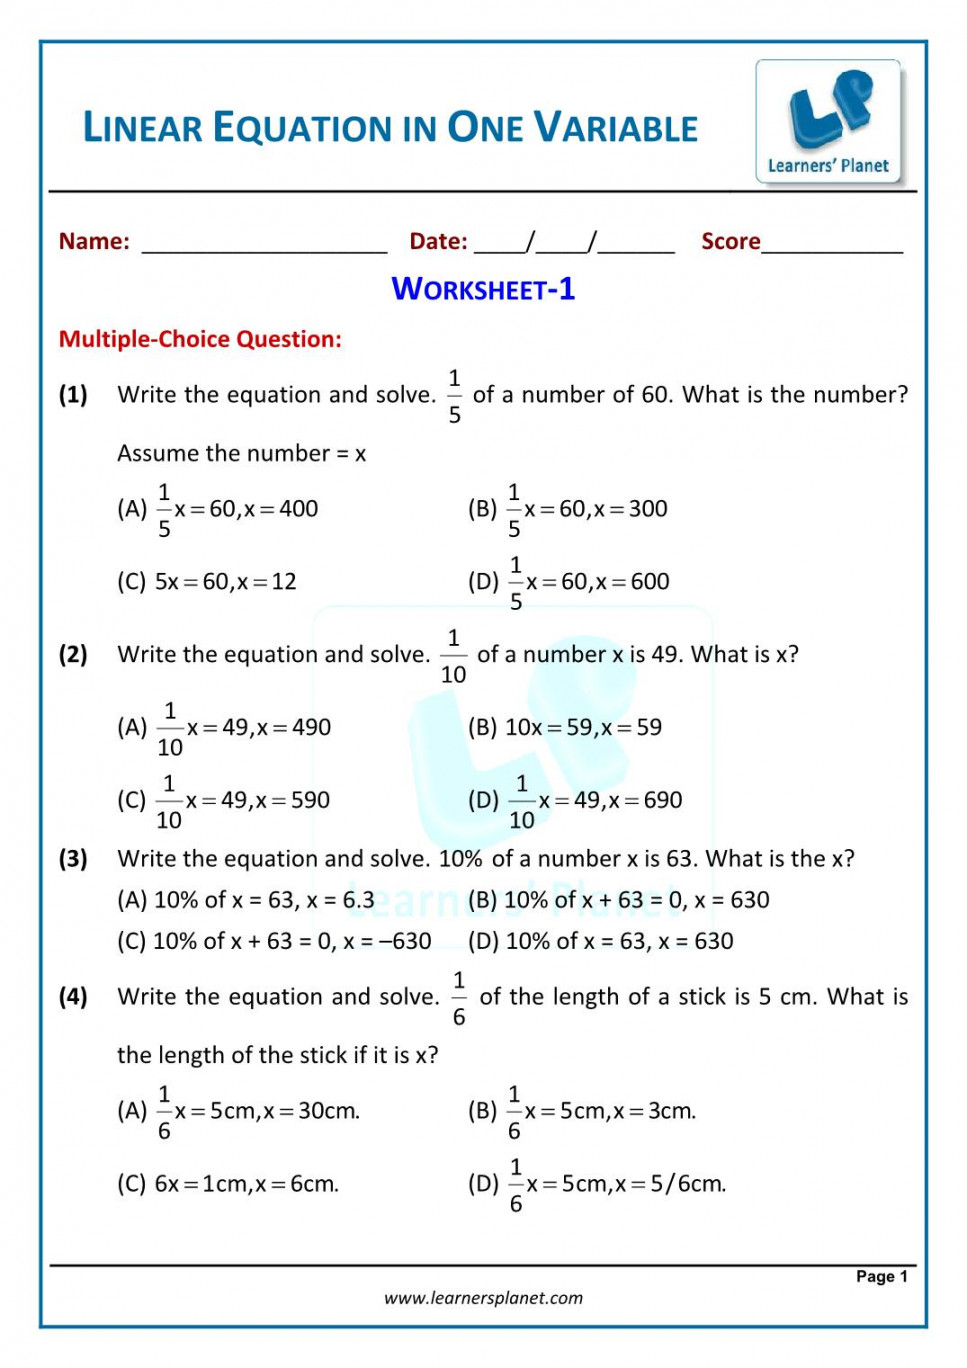 Linear equation in one variable worksheet for class